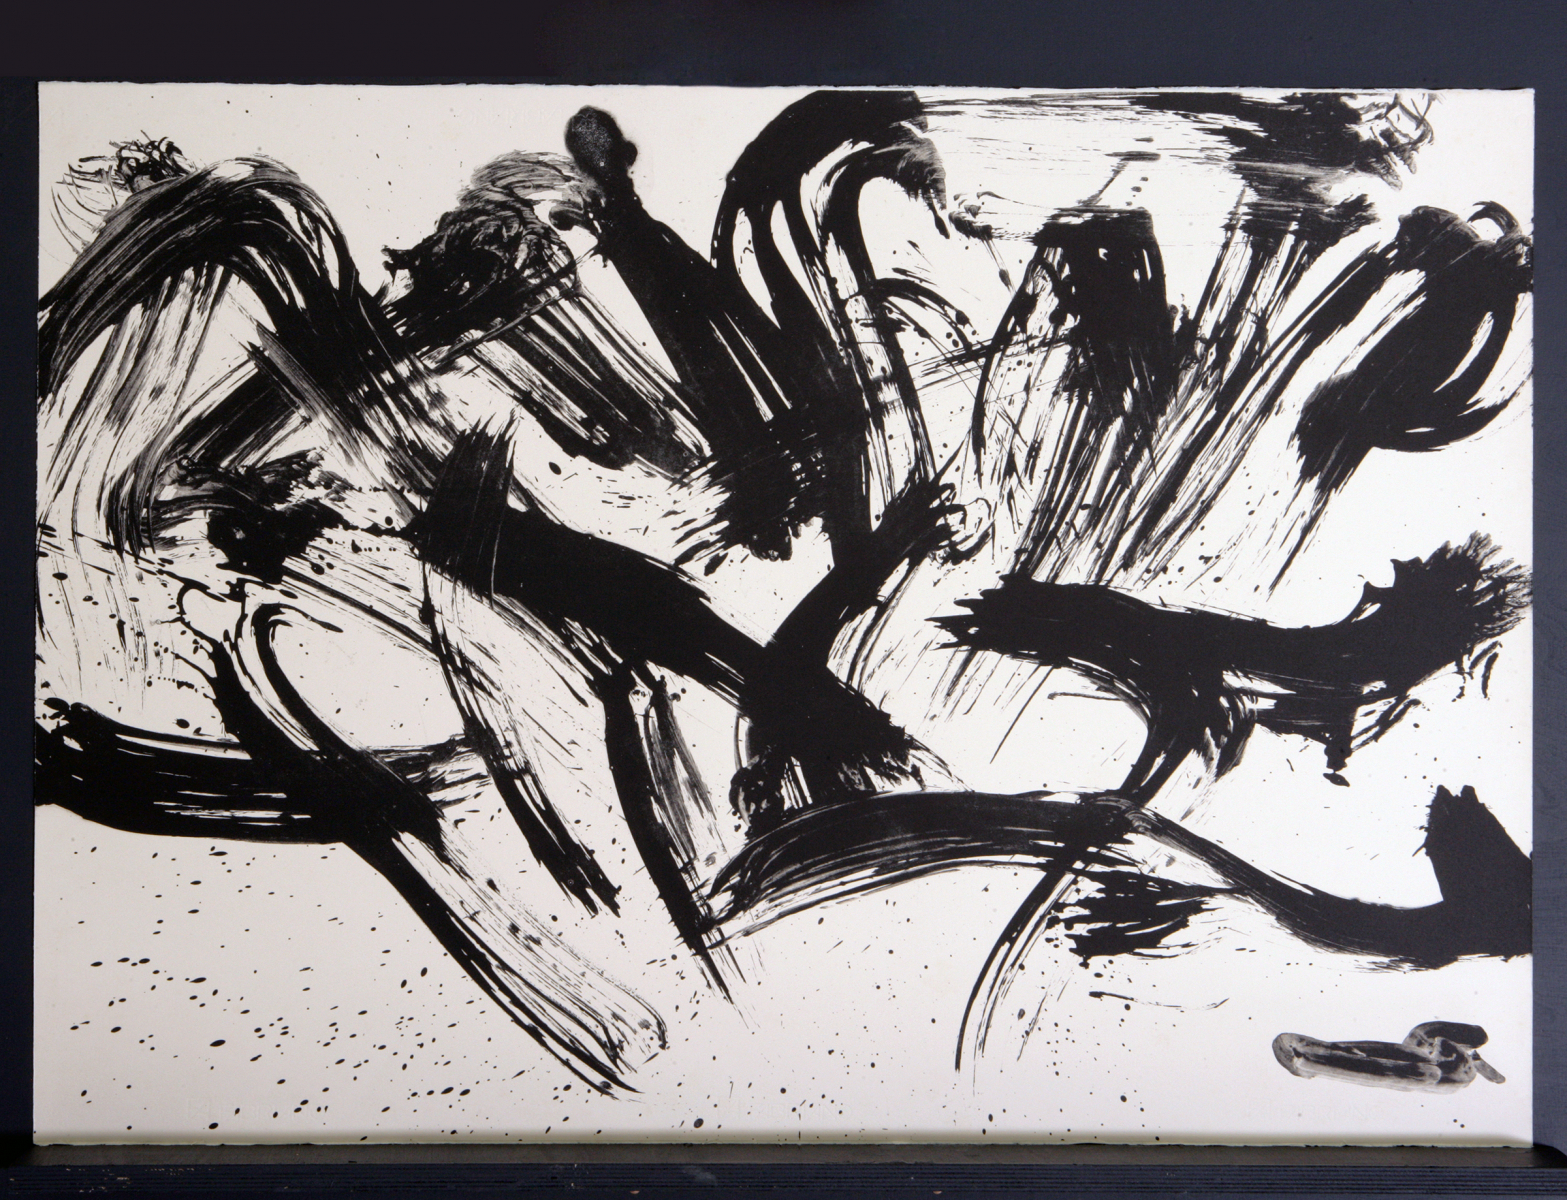 Untitled, 1994, Lithography, 100x70cm